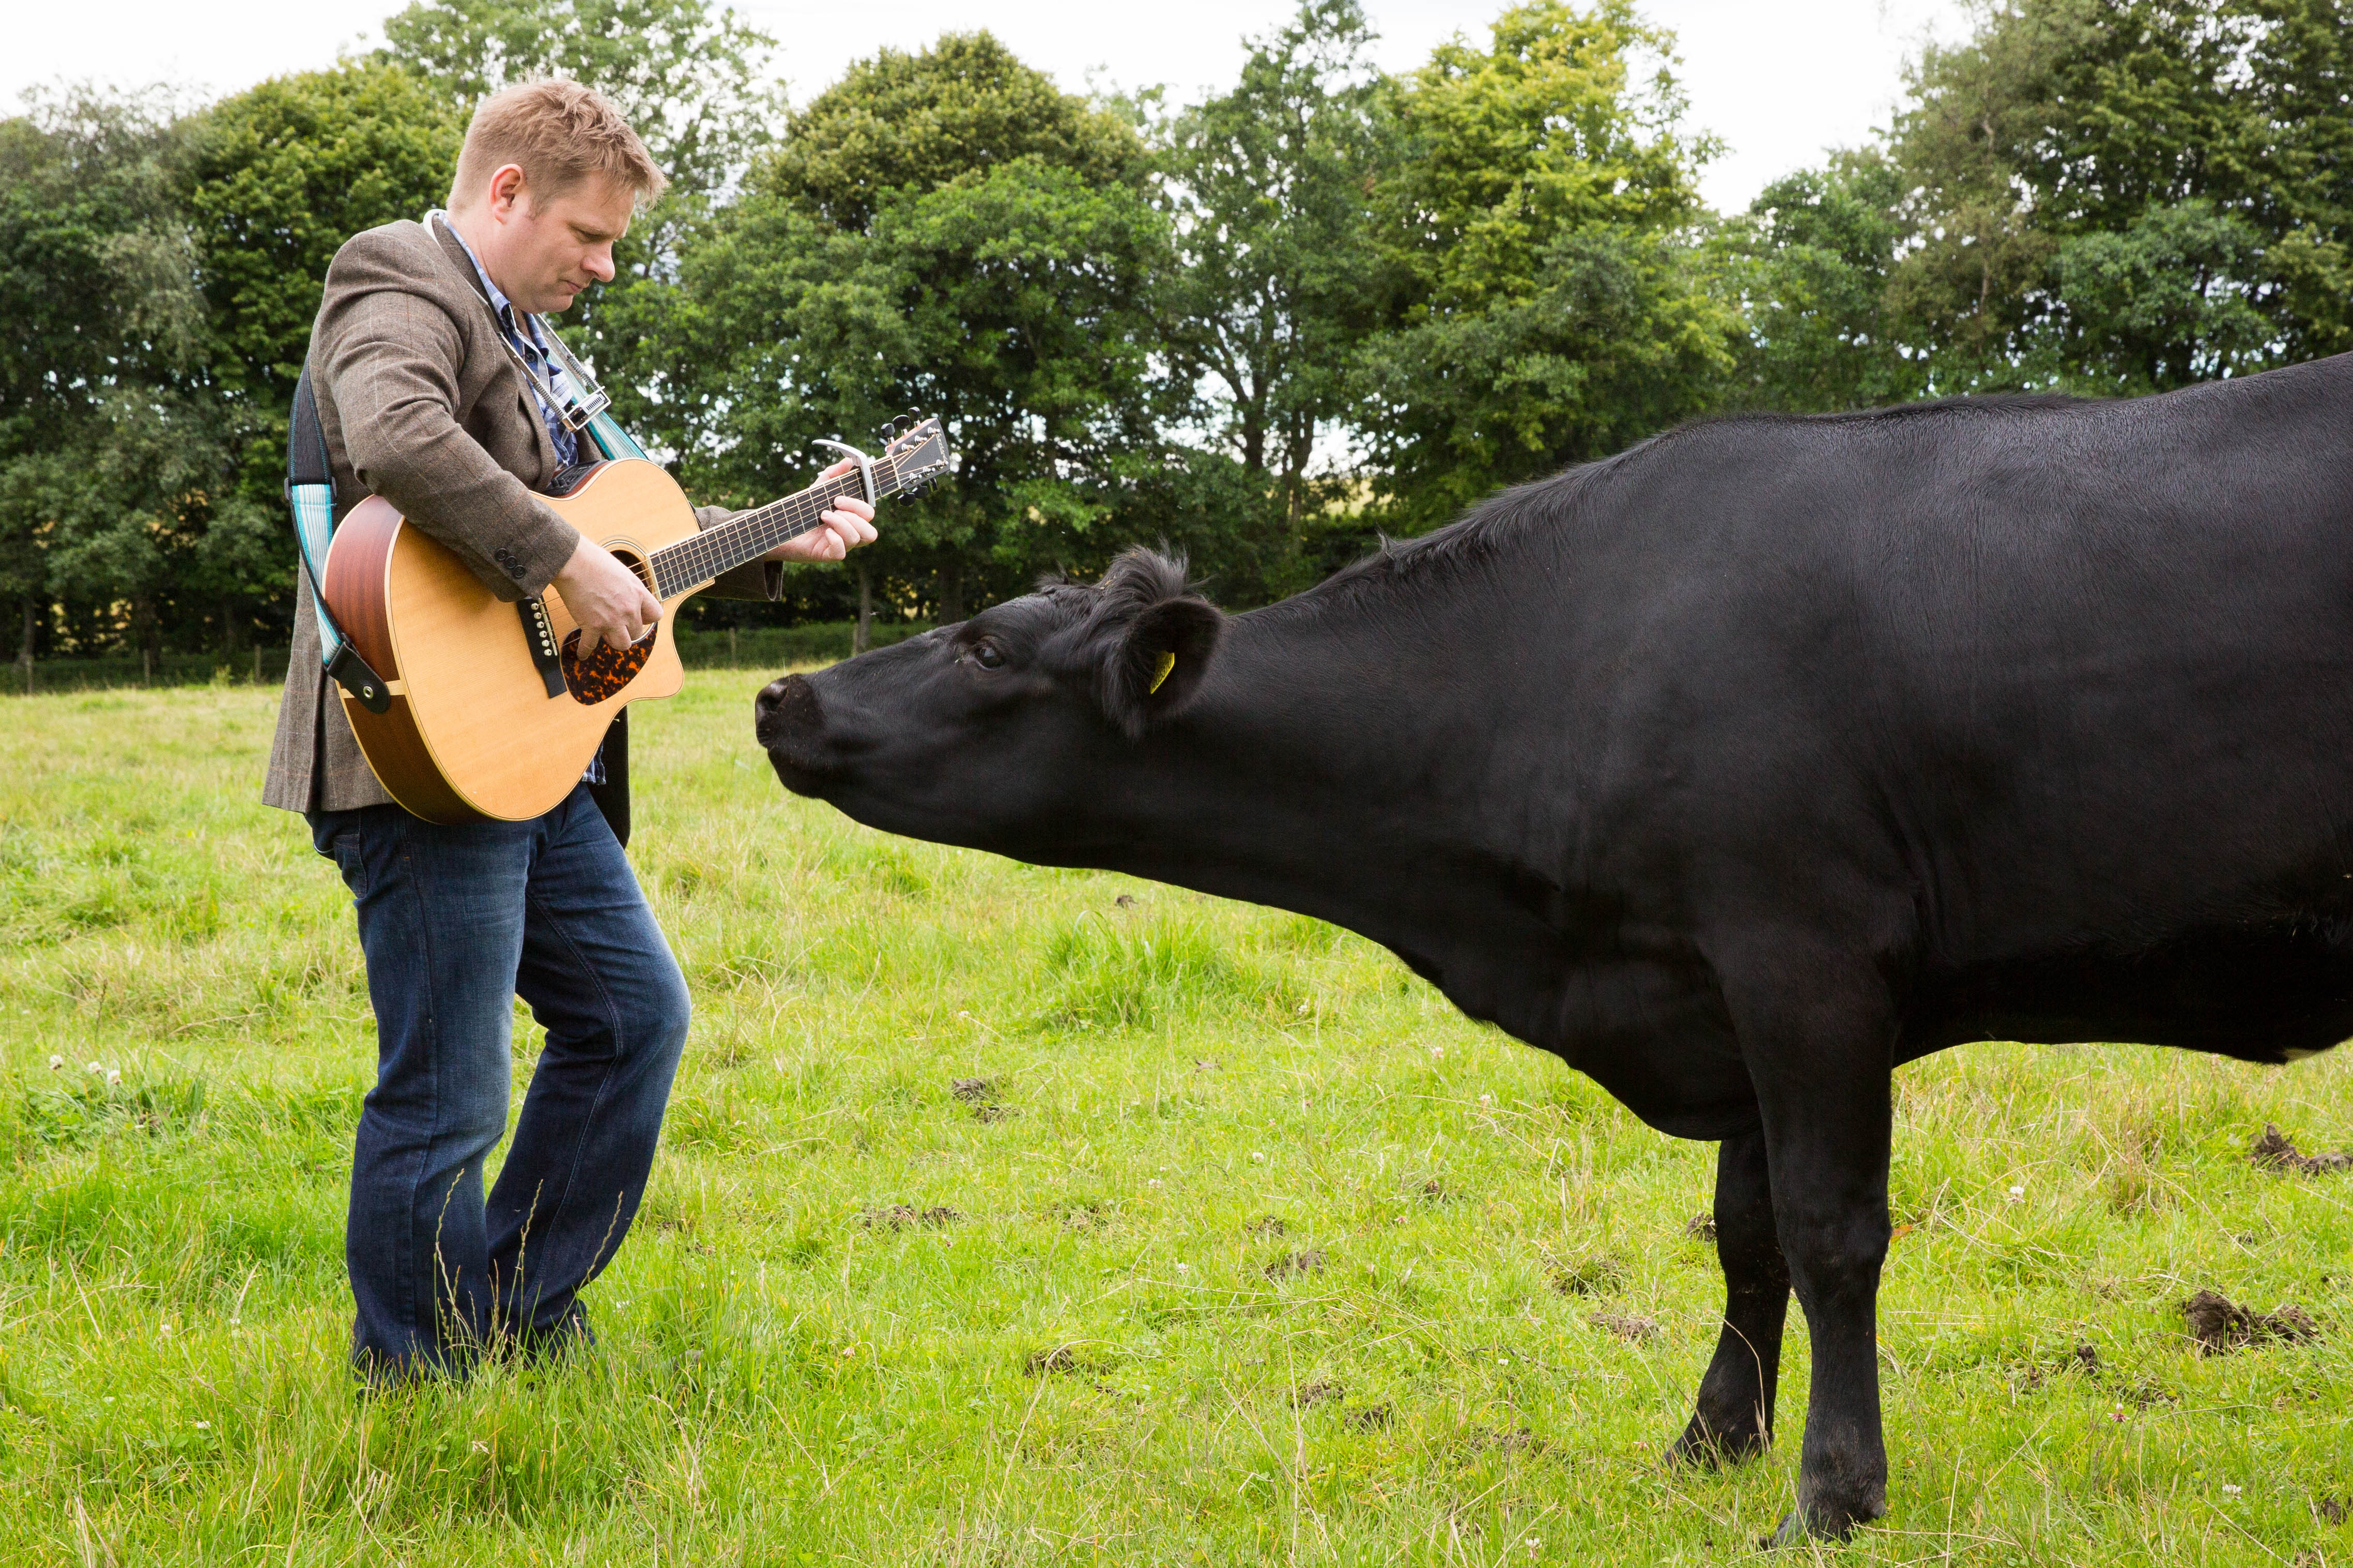 In 2001 reports emerged of classical music helping cows to produce increased quantities of milk